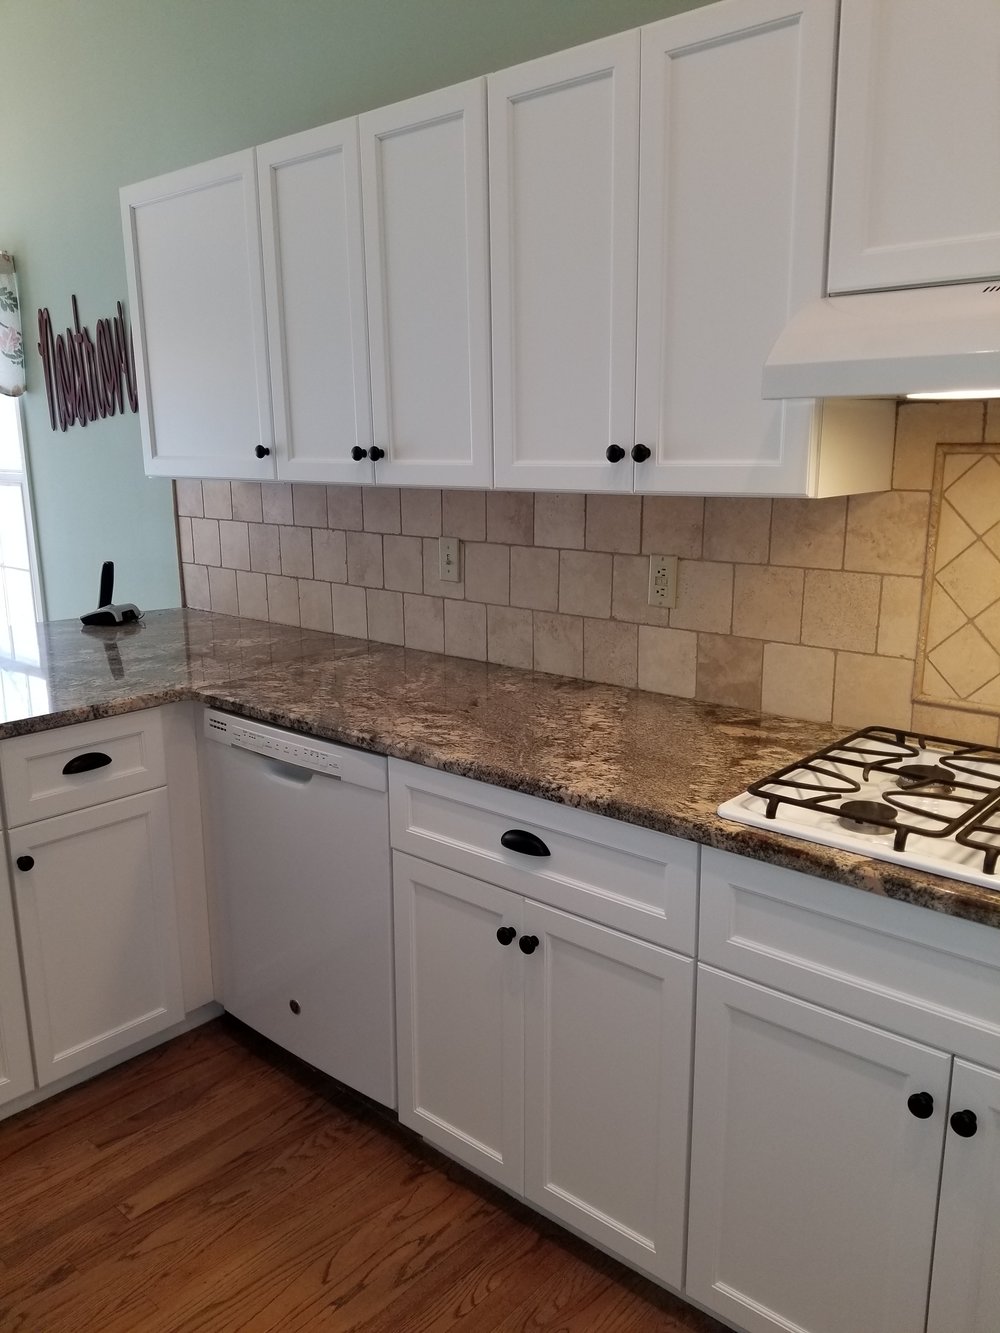 Redooring Kitchen Cabinets St Louis Cabinet Refacing Painting